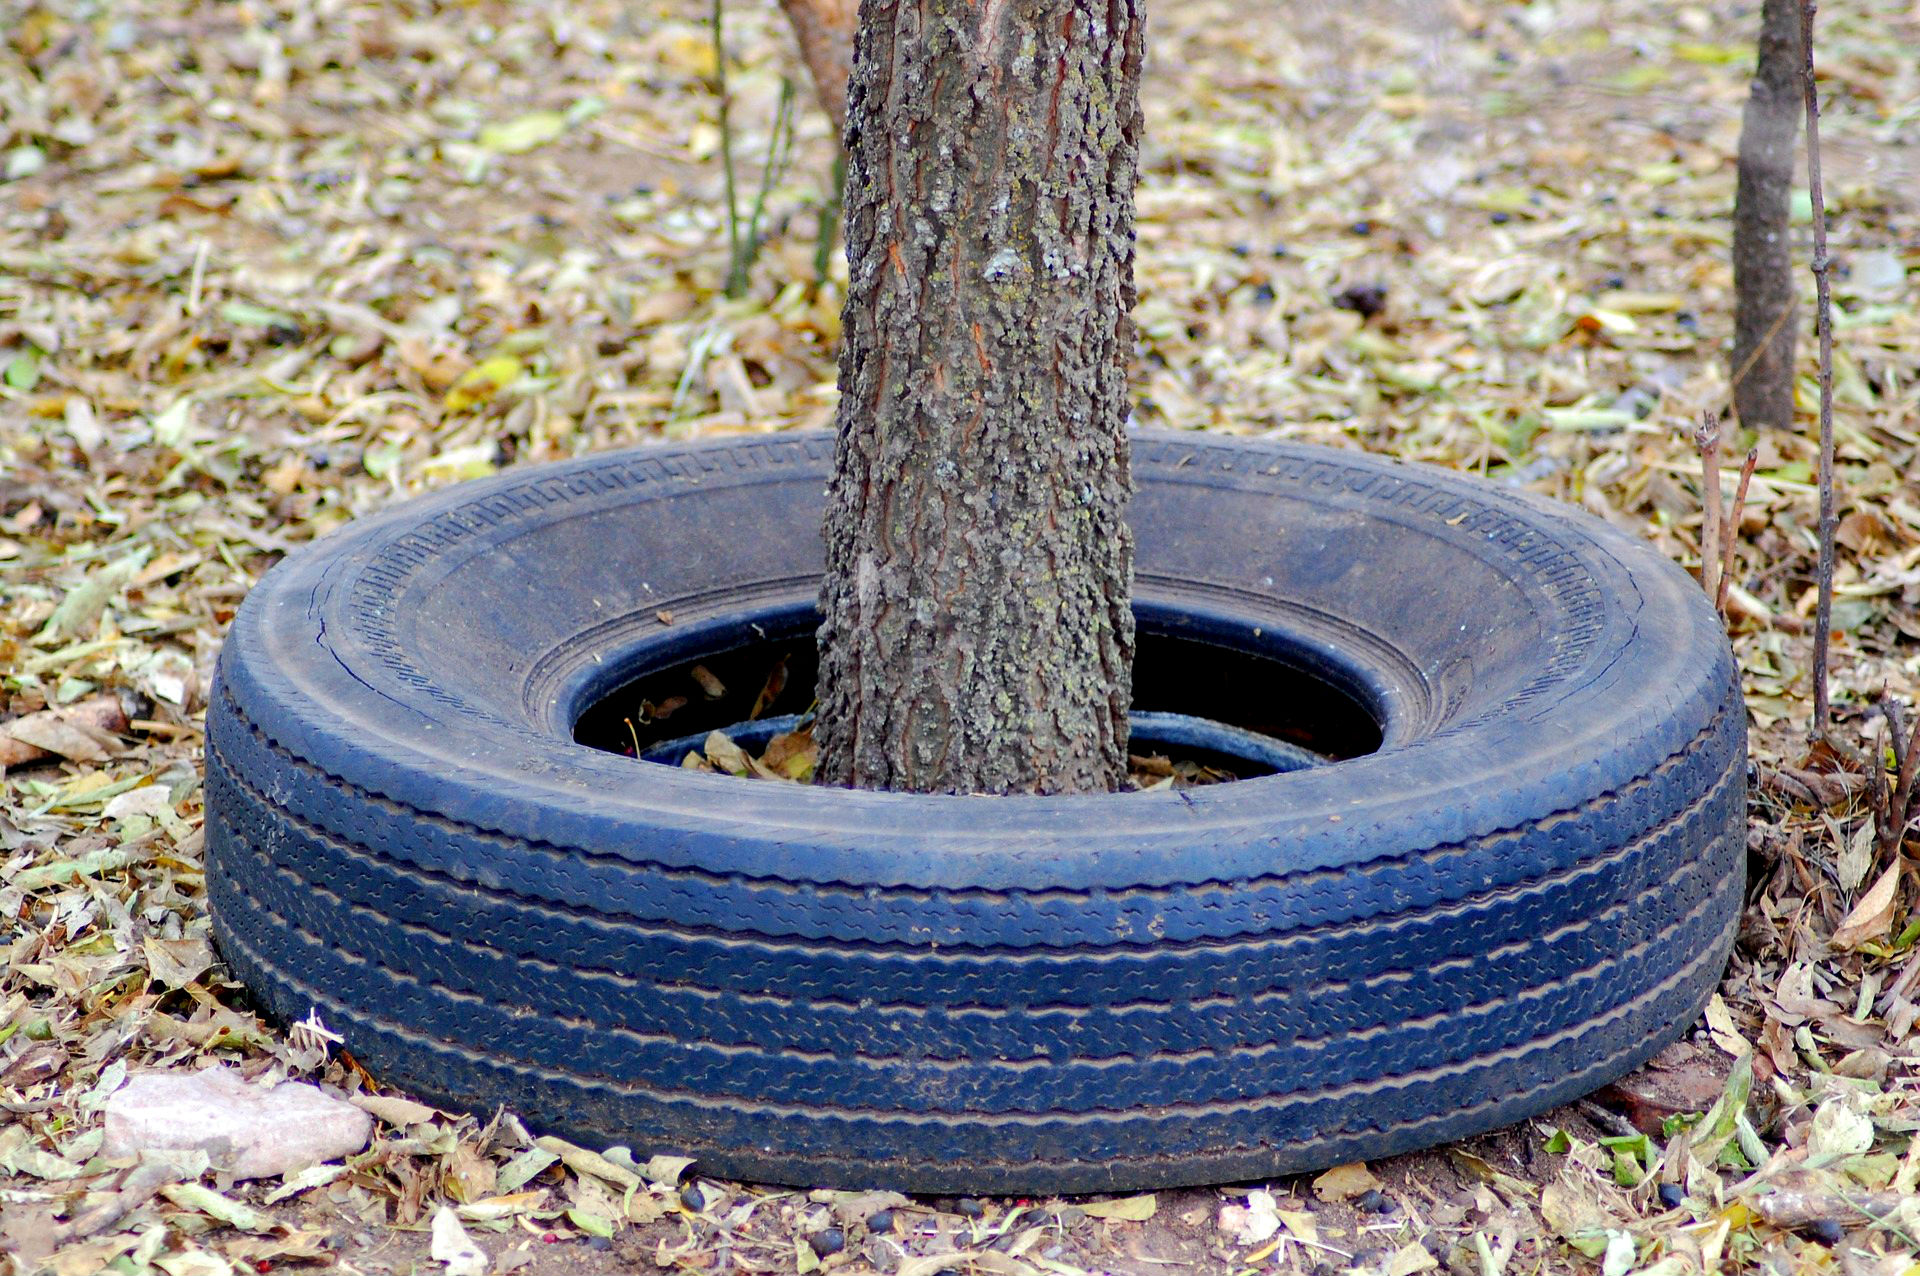 Is Natural Rubber Better Than Synthetic Rubber? Here's What We